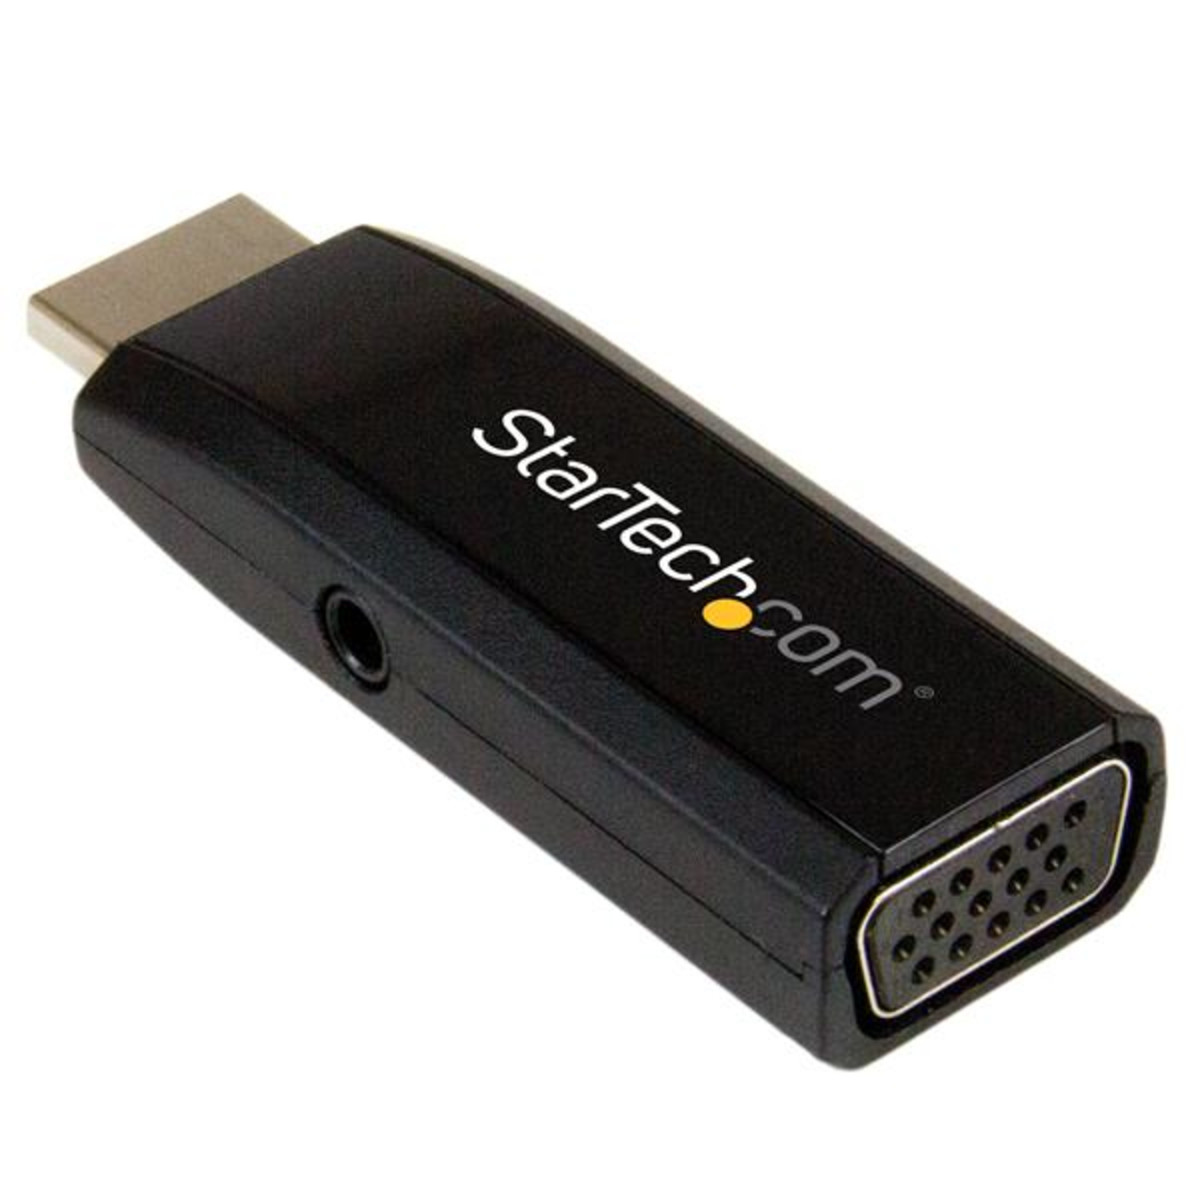 HDMI to VGA converter with audio